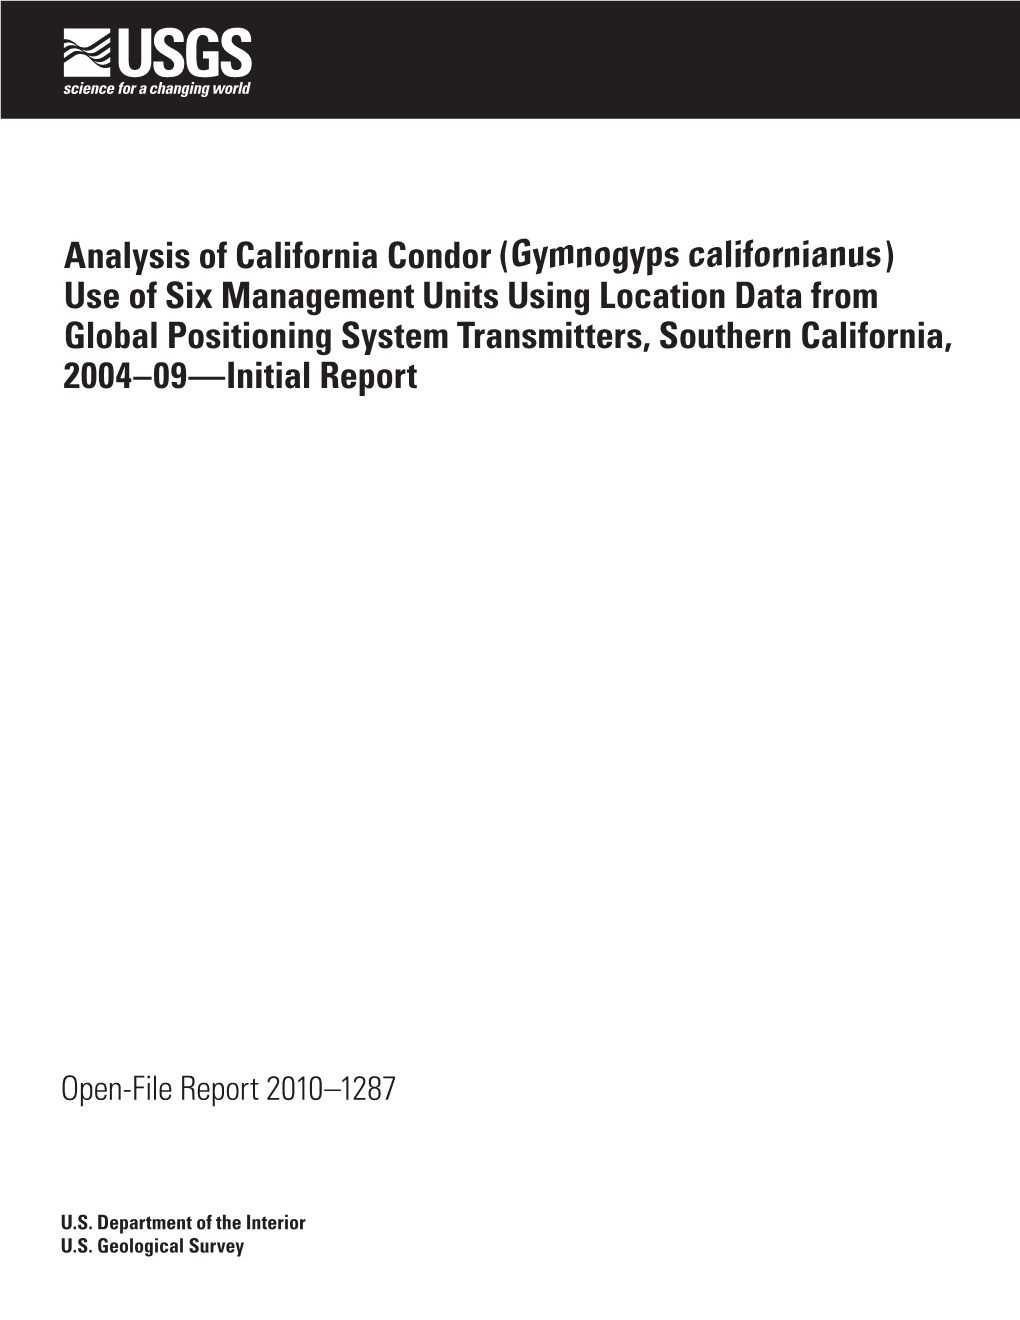 Gymnogyps Californianus) Use of Six Management Units Using Location Data from Global Positioning System Transmitters, Southern California, 2004–09—Initial Report